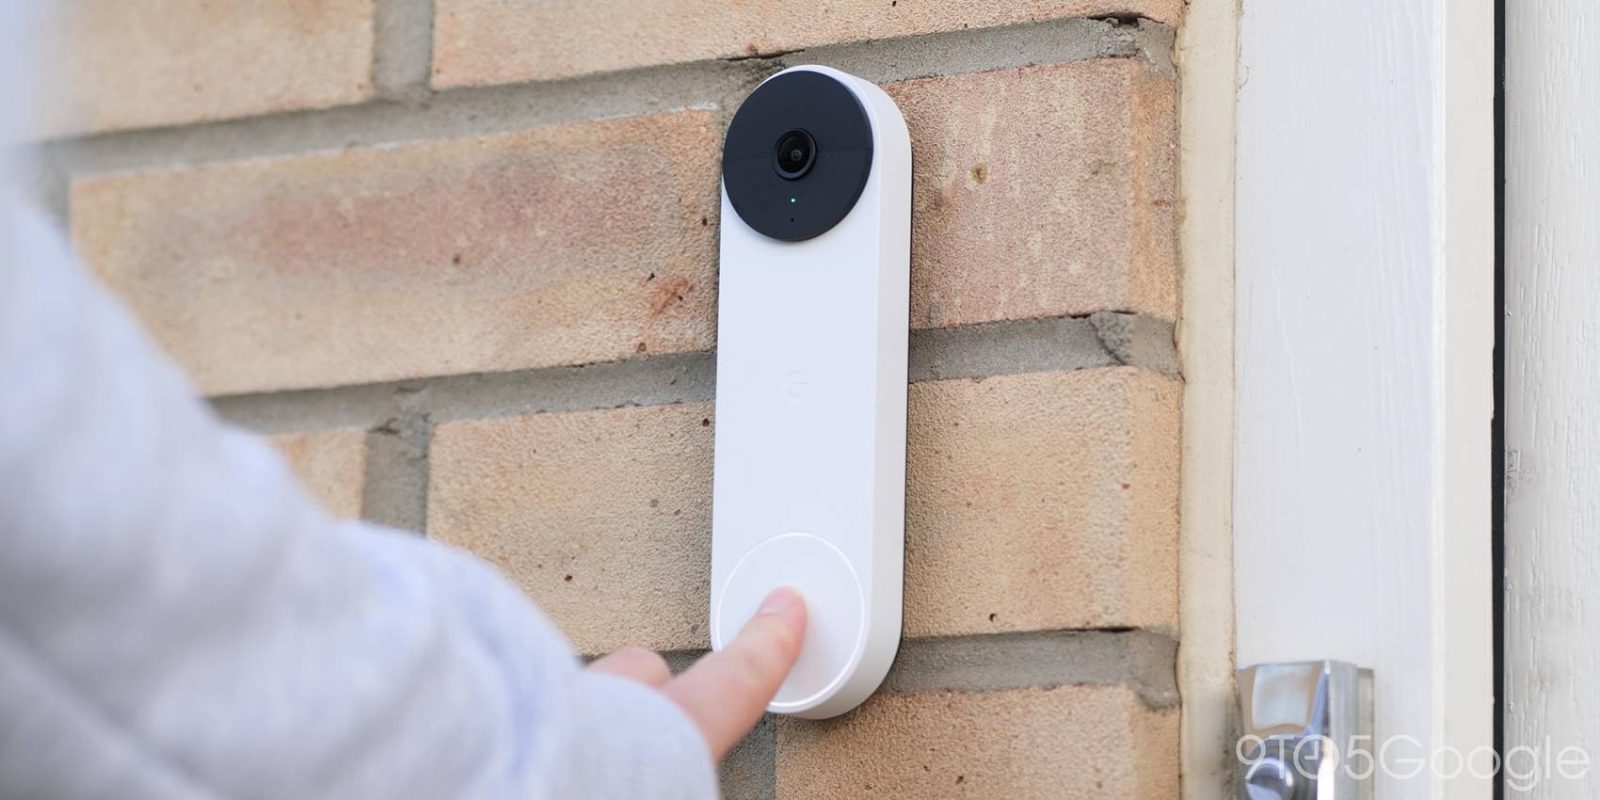 11 things to love about the New Nest Cam and Doorbell